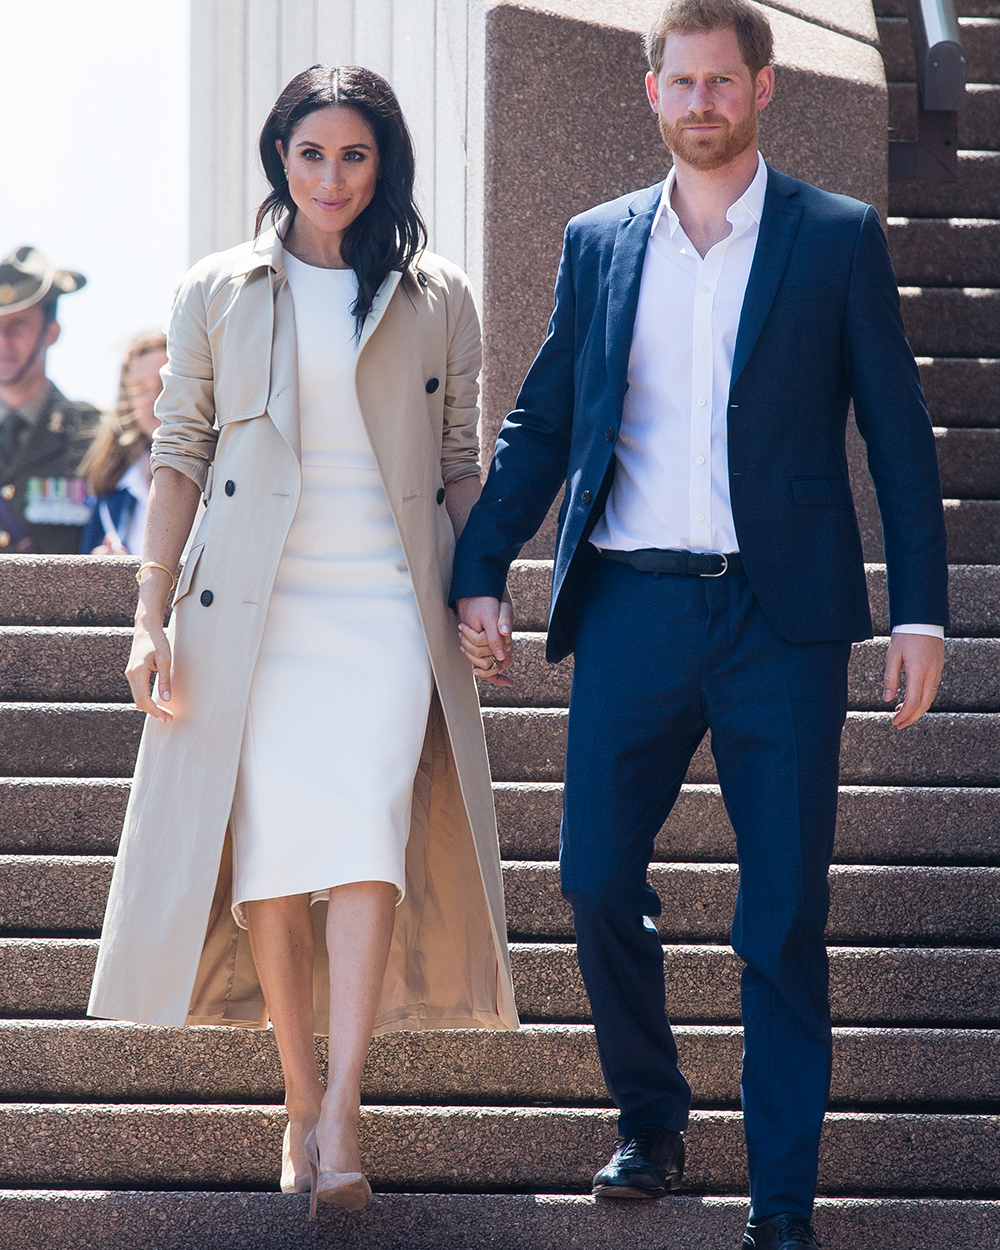 October 16, 2018: Meghan, Duchess of Sussex descends the stairs outside the Sydney Opera House on day one of her and husband Prince Harry, Duke of Sussex' tour of Australia. Meghan wears a white sleeveless sheath dress aptly named Blessed by Australian designer Karen Gee underneath a camel trench coat. Meghan accessorised with nude suede pumps by Stuart Weitzman and butterfly earrings and matching bracelet that belonged to the late Princess Diana.